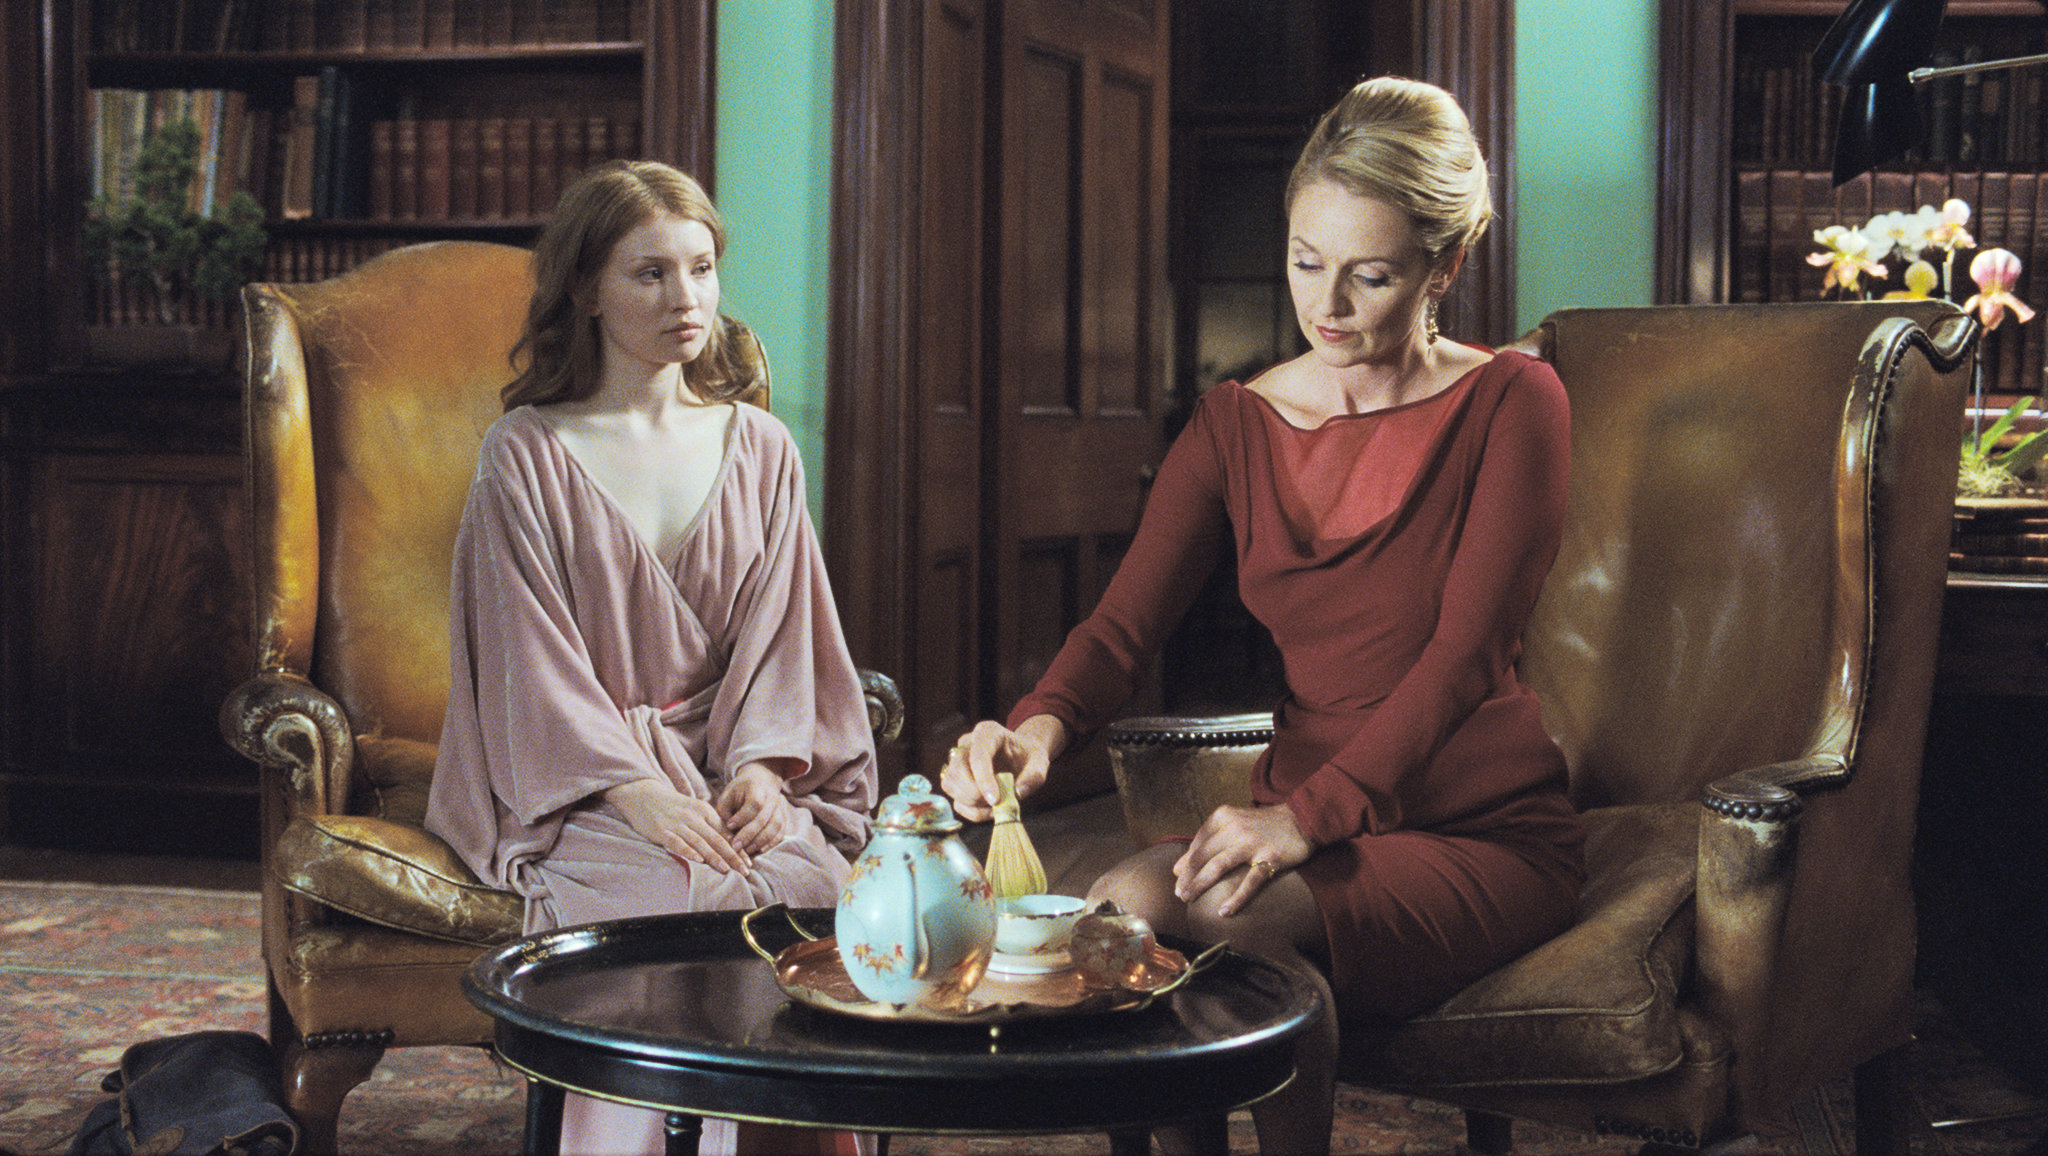 Emily Browning star as Lucy and Rachael Blake star as Clara in IFC Films' Sleeping Beauty (2011)